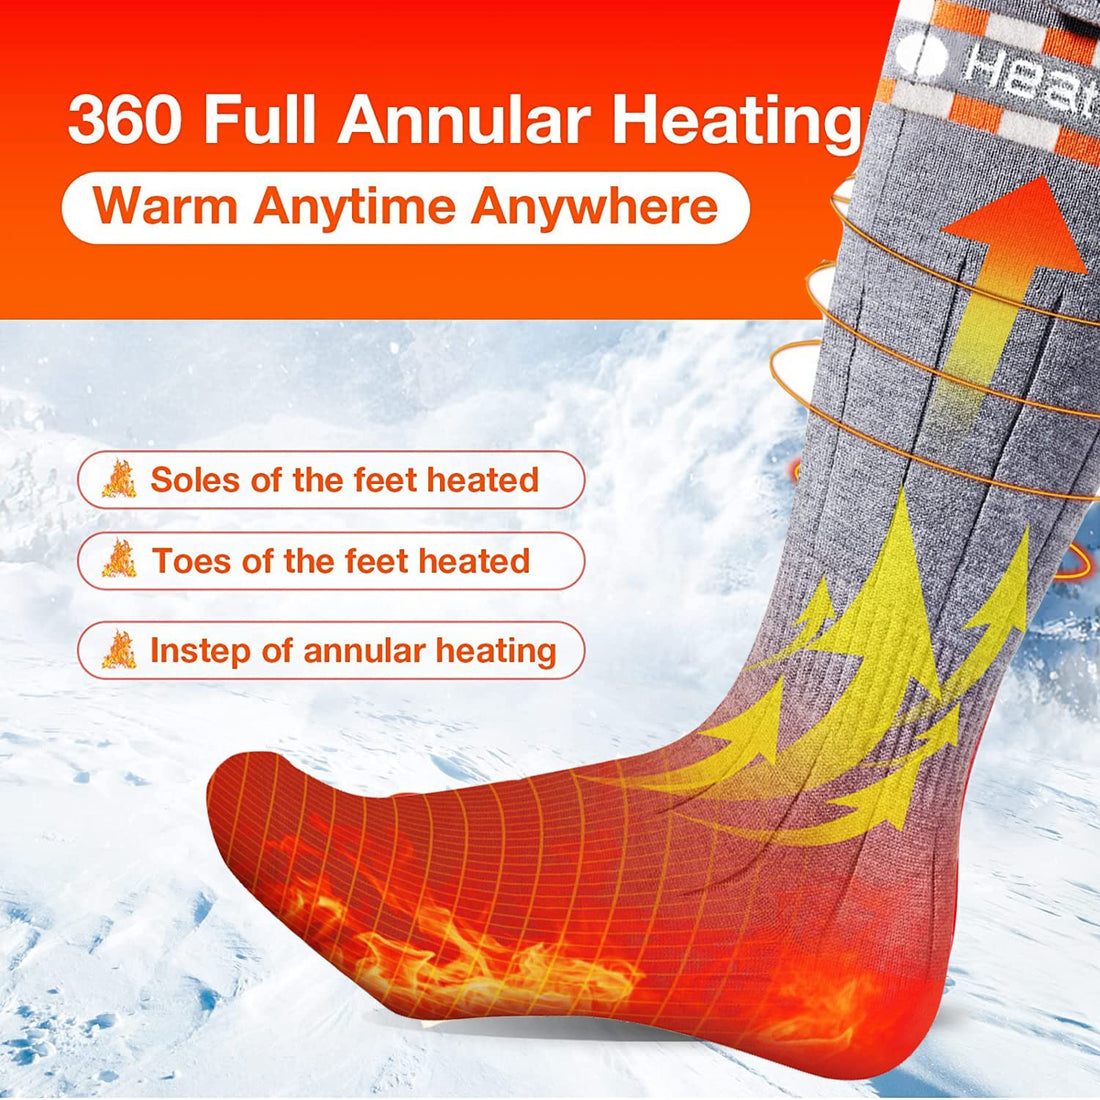 Heated Socks for Men Women, Rechargeable Electric Socks,5V 5000mAh Batteries Powered Thermal Foot Warmers with 4 Heat Settings for Hunting,Skiing,Camping and Winter Outdoors Working (Grey)